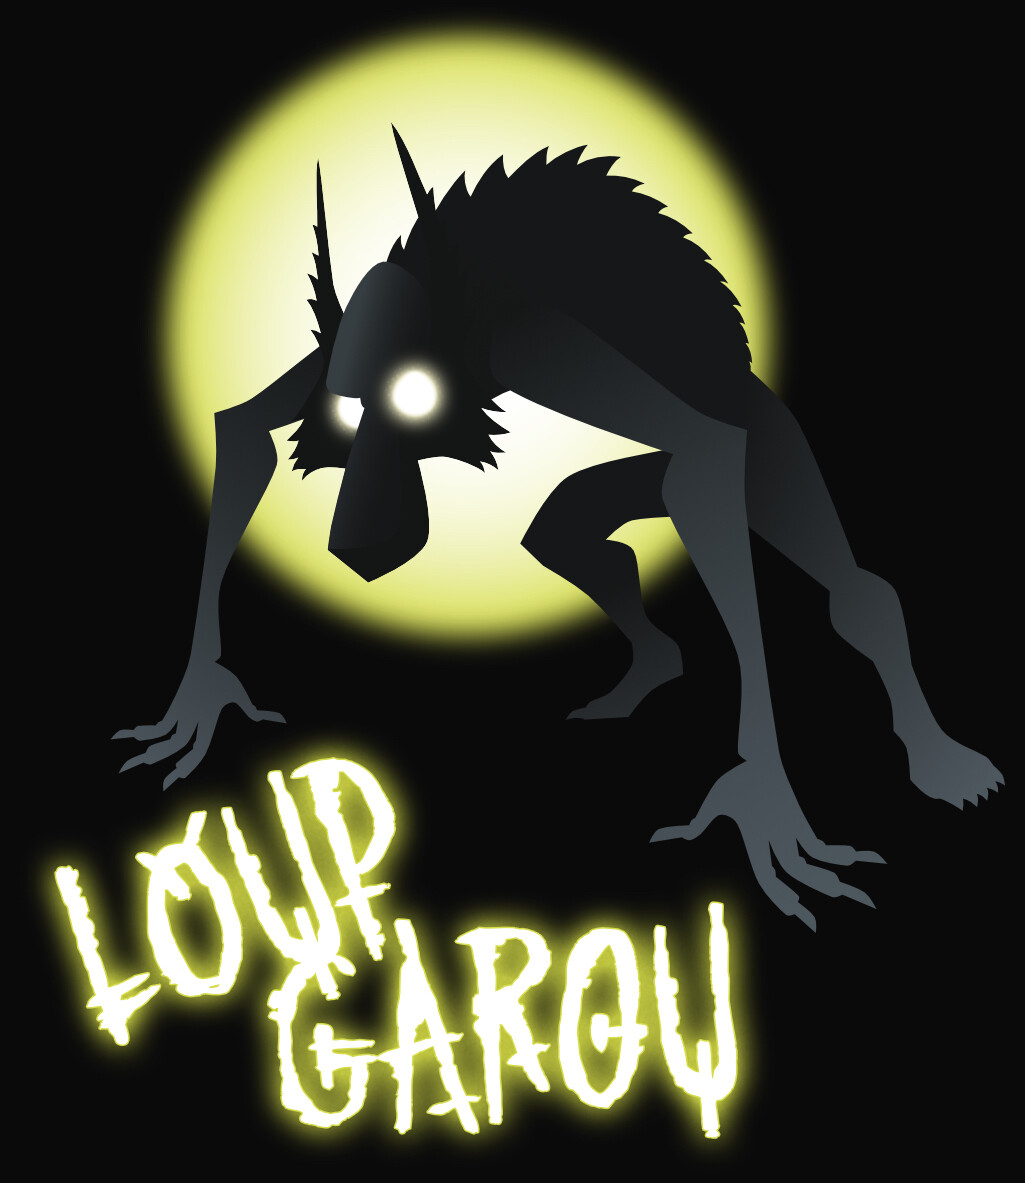 Neato (high-quality t-shirts, large sizes):
https://www.neatoshop.com/product/Cryptid-Legend-Loup-Garou
TeePublic (affordable shirts and stickers):
https://www.teepublic.com/t-shirt/36649094-cryptid-legend-loup-garou?store_id=2013963